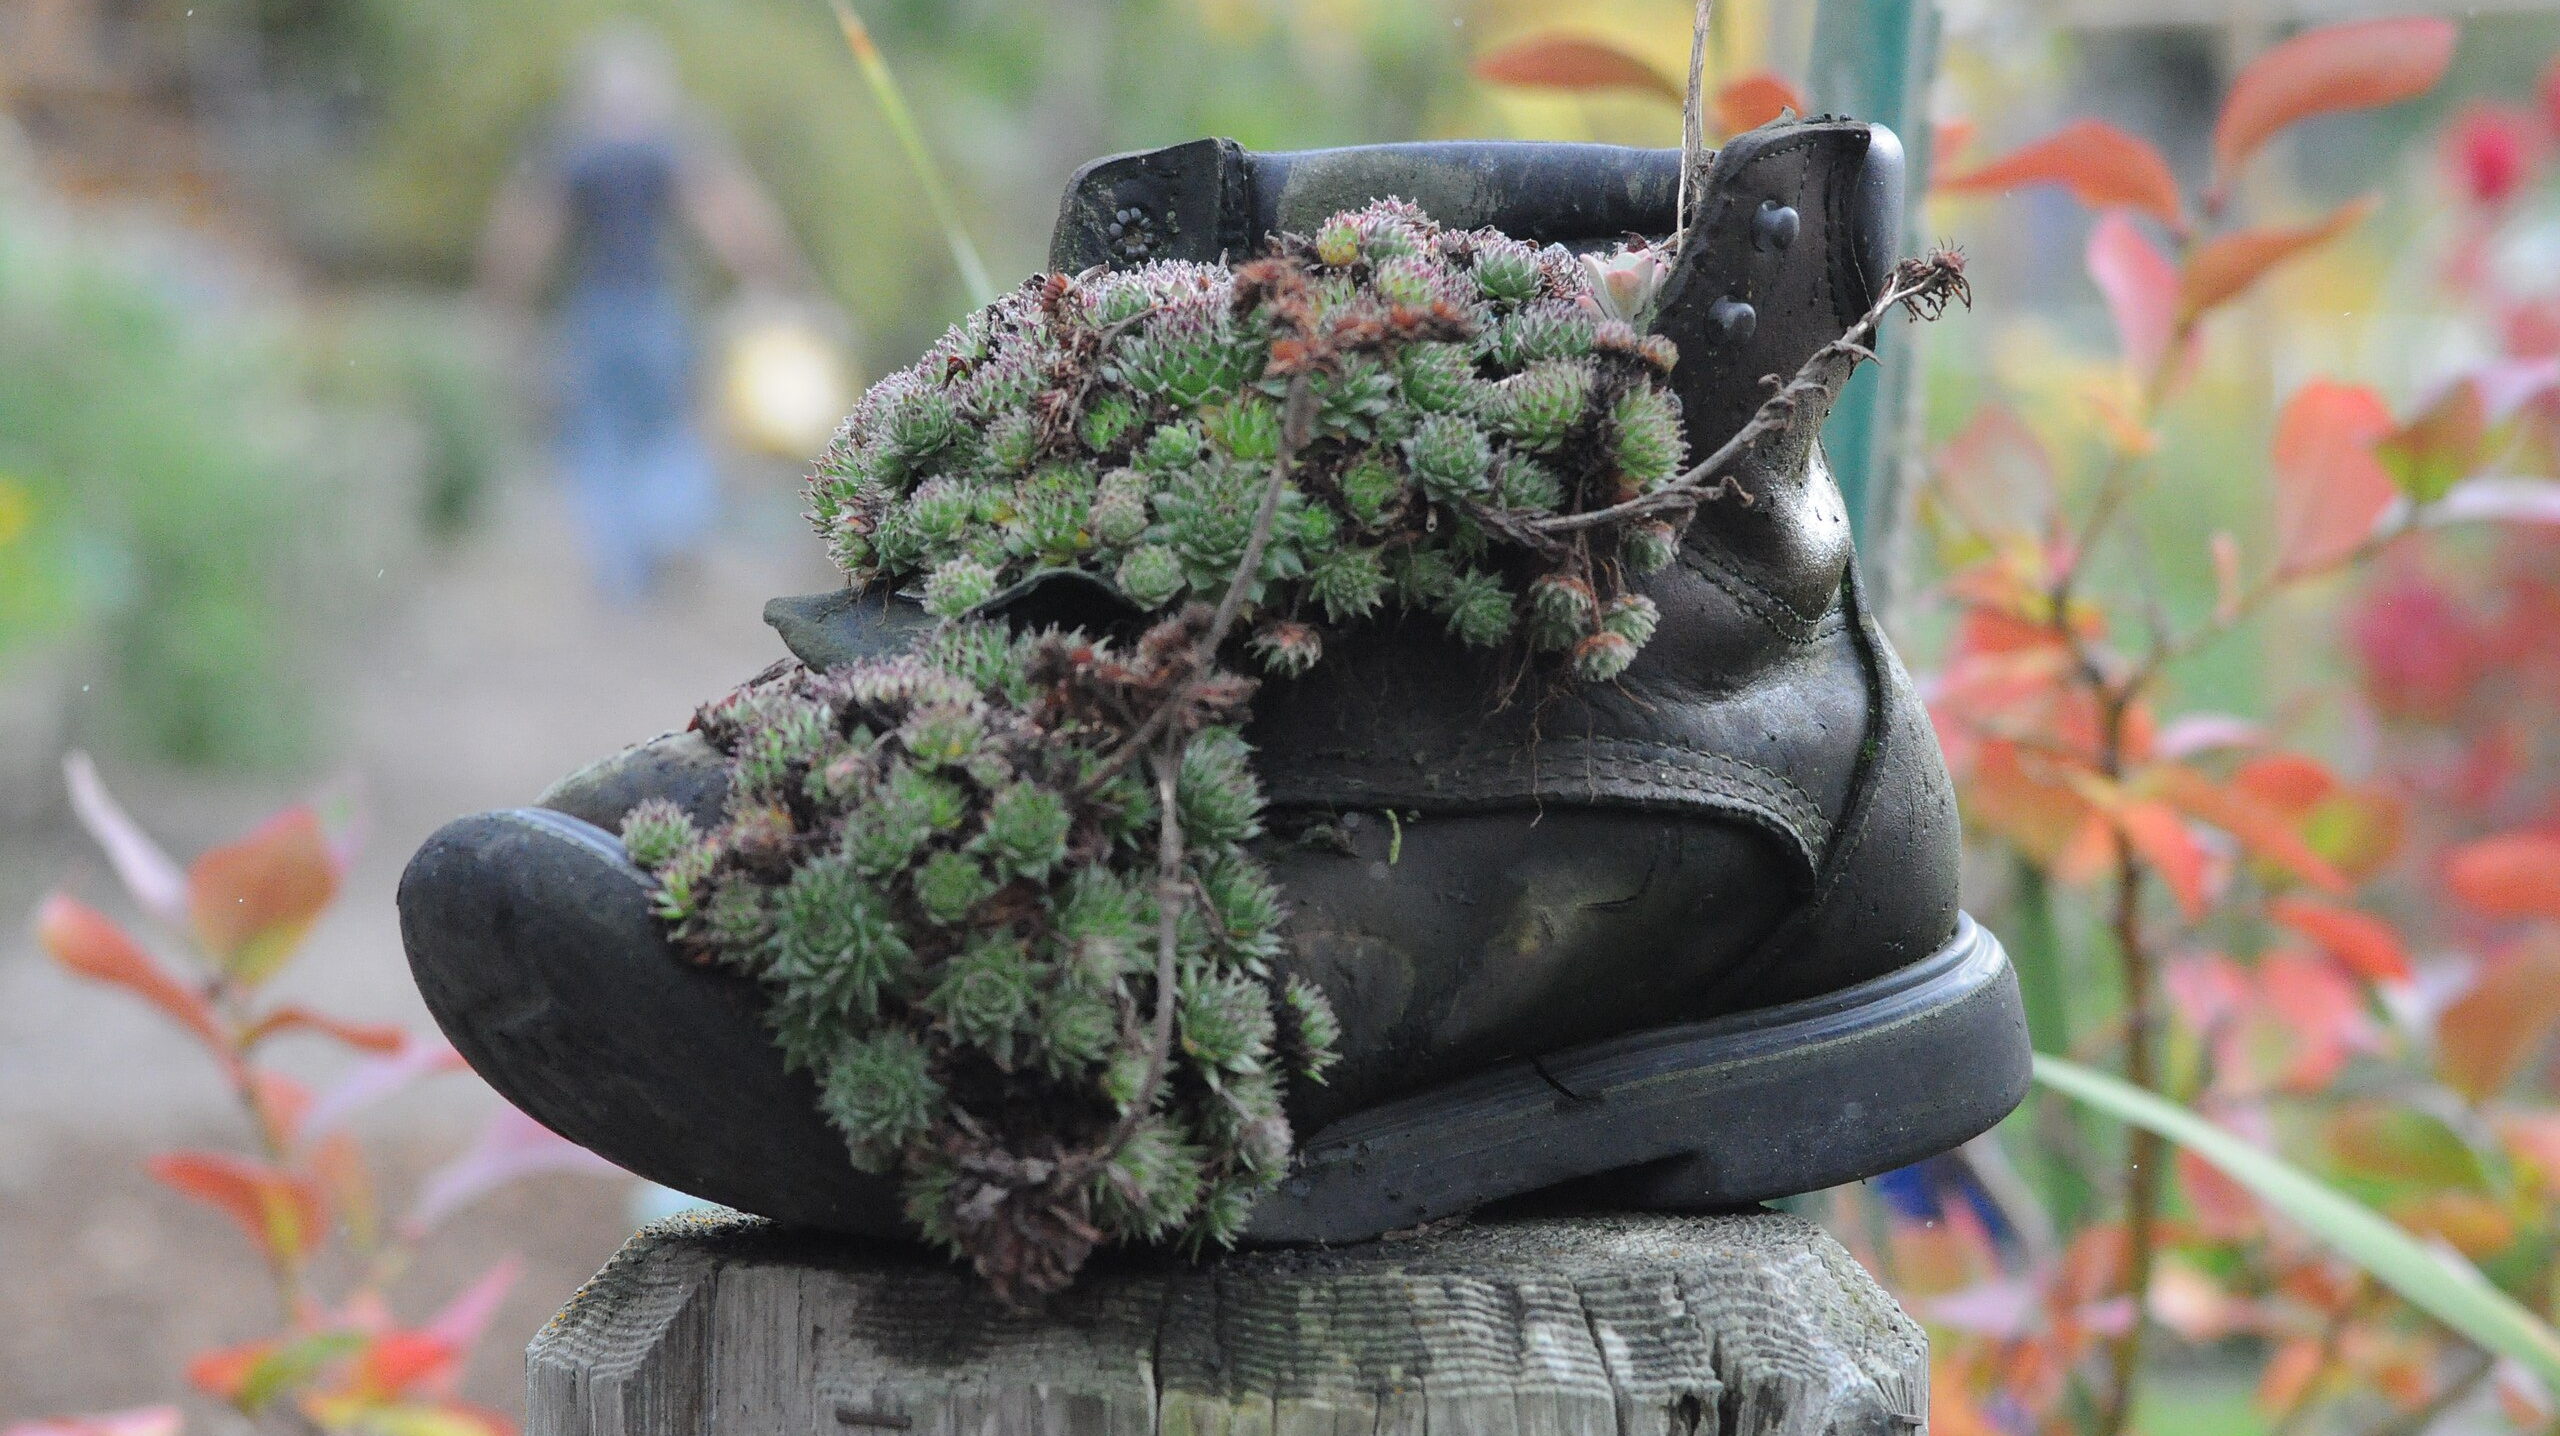 Collection of small trailing succulent plants in an old black boot 